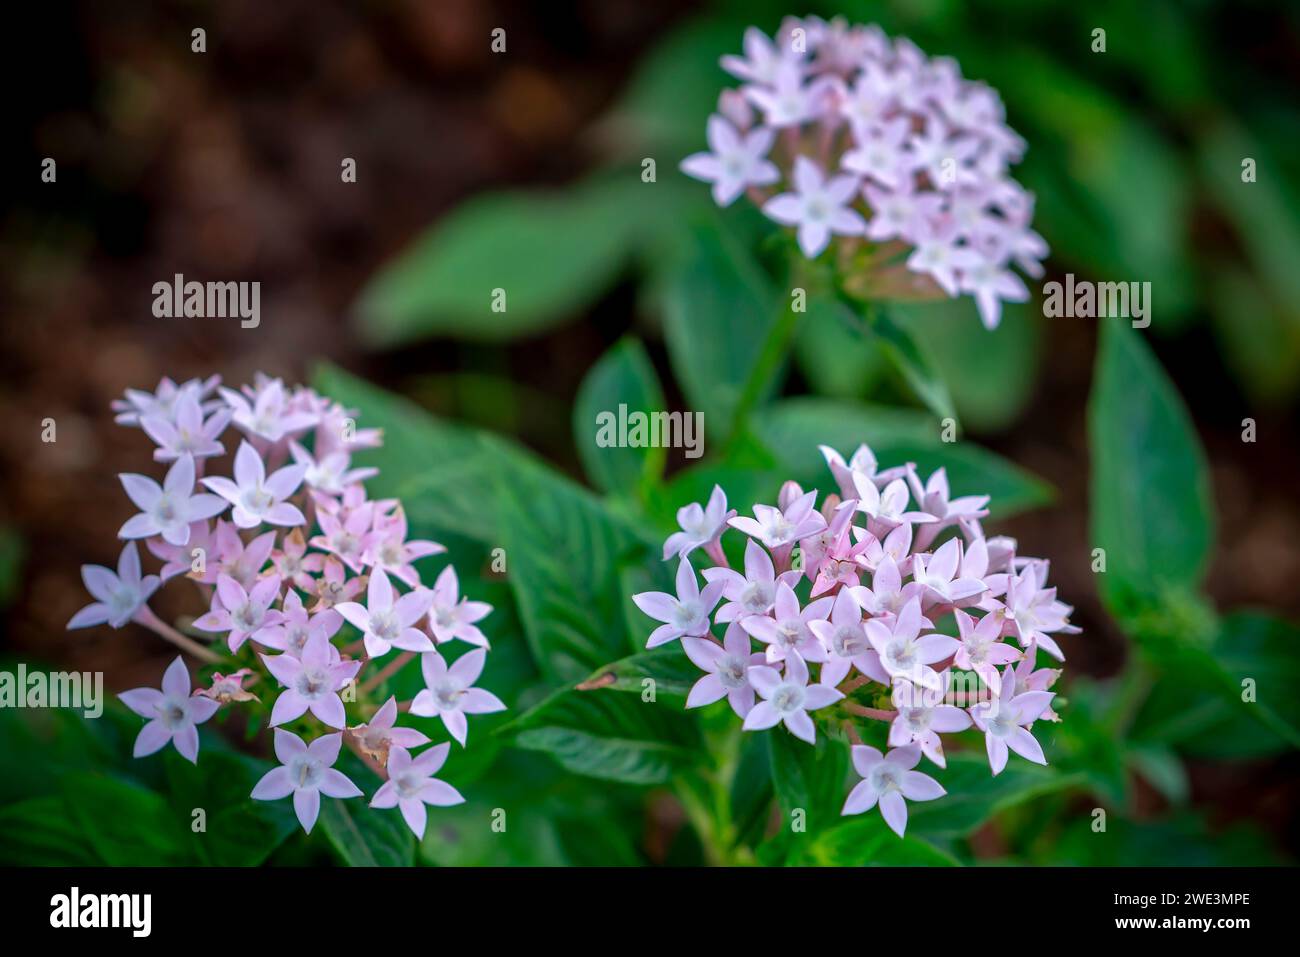 Bunches of Vibrant Pink Egyptian Starcluster or Pentas Flowers Blooming among Green Foliage Stock Photo